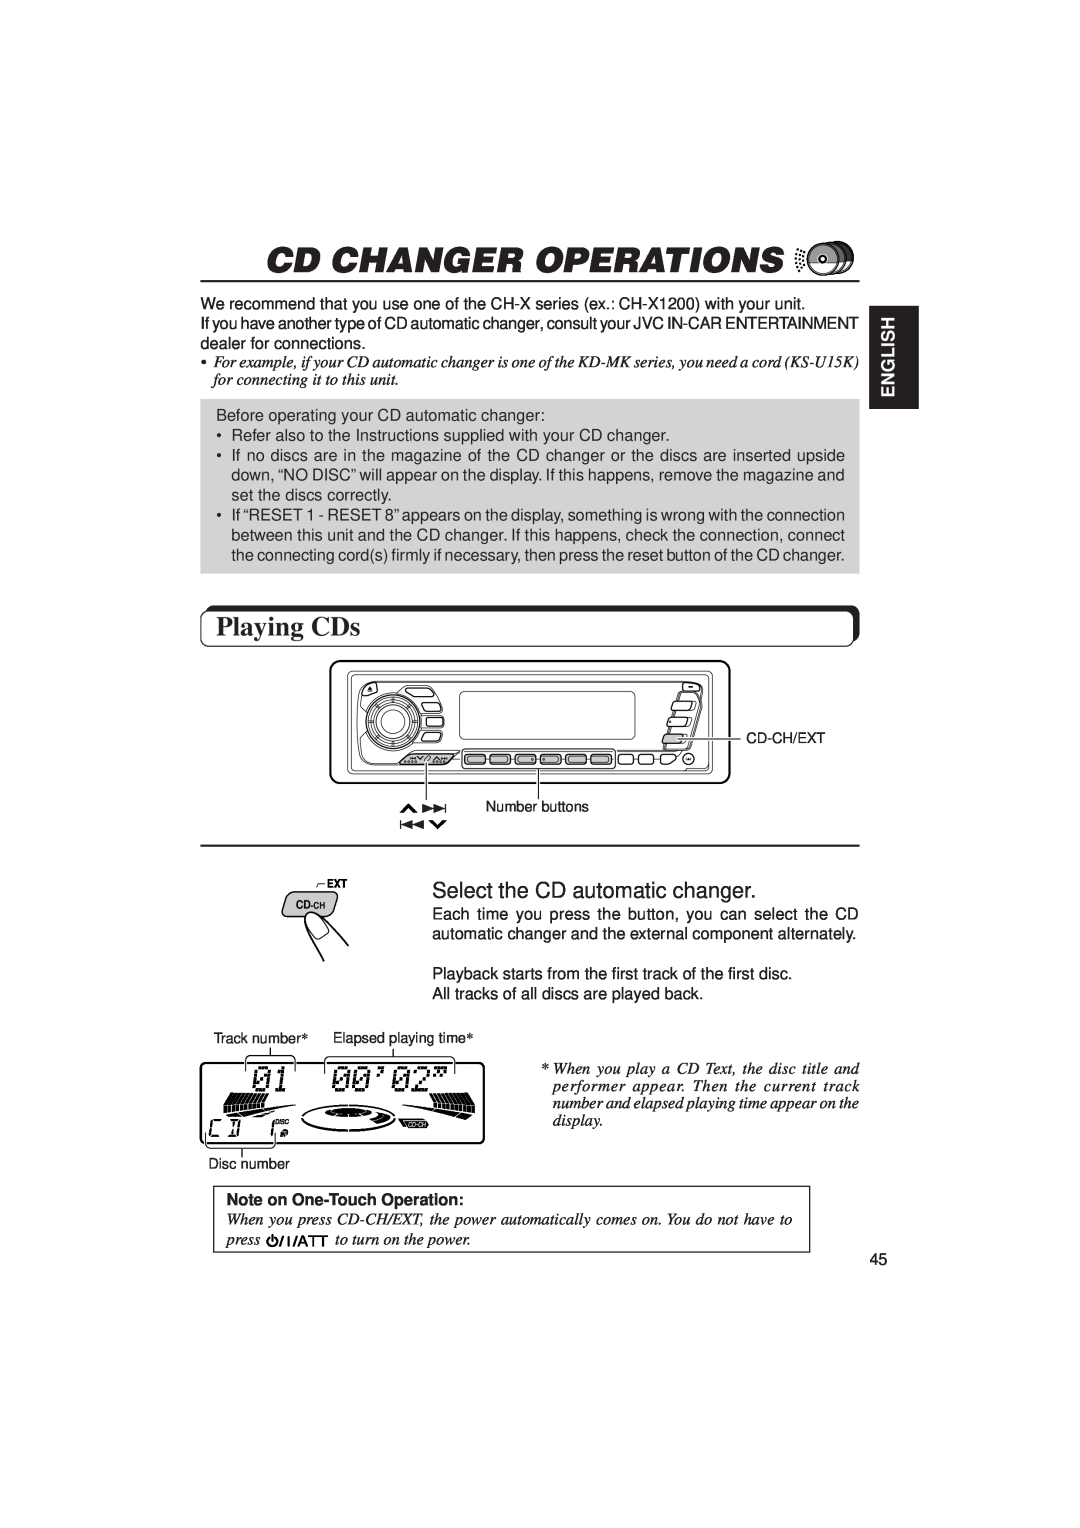 JVC KD-MX2900R manual Cd Changer Operations, Playing CDs, English, Note on One-TouchOperation 